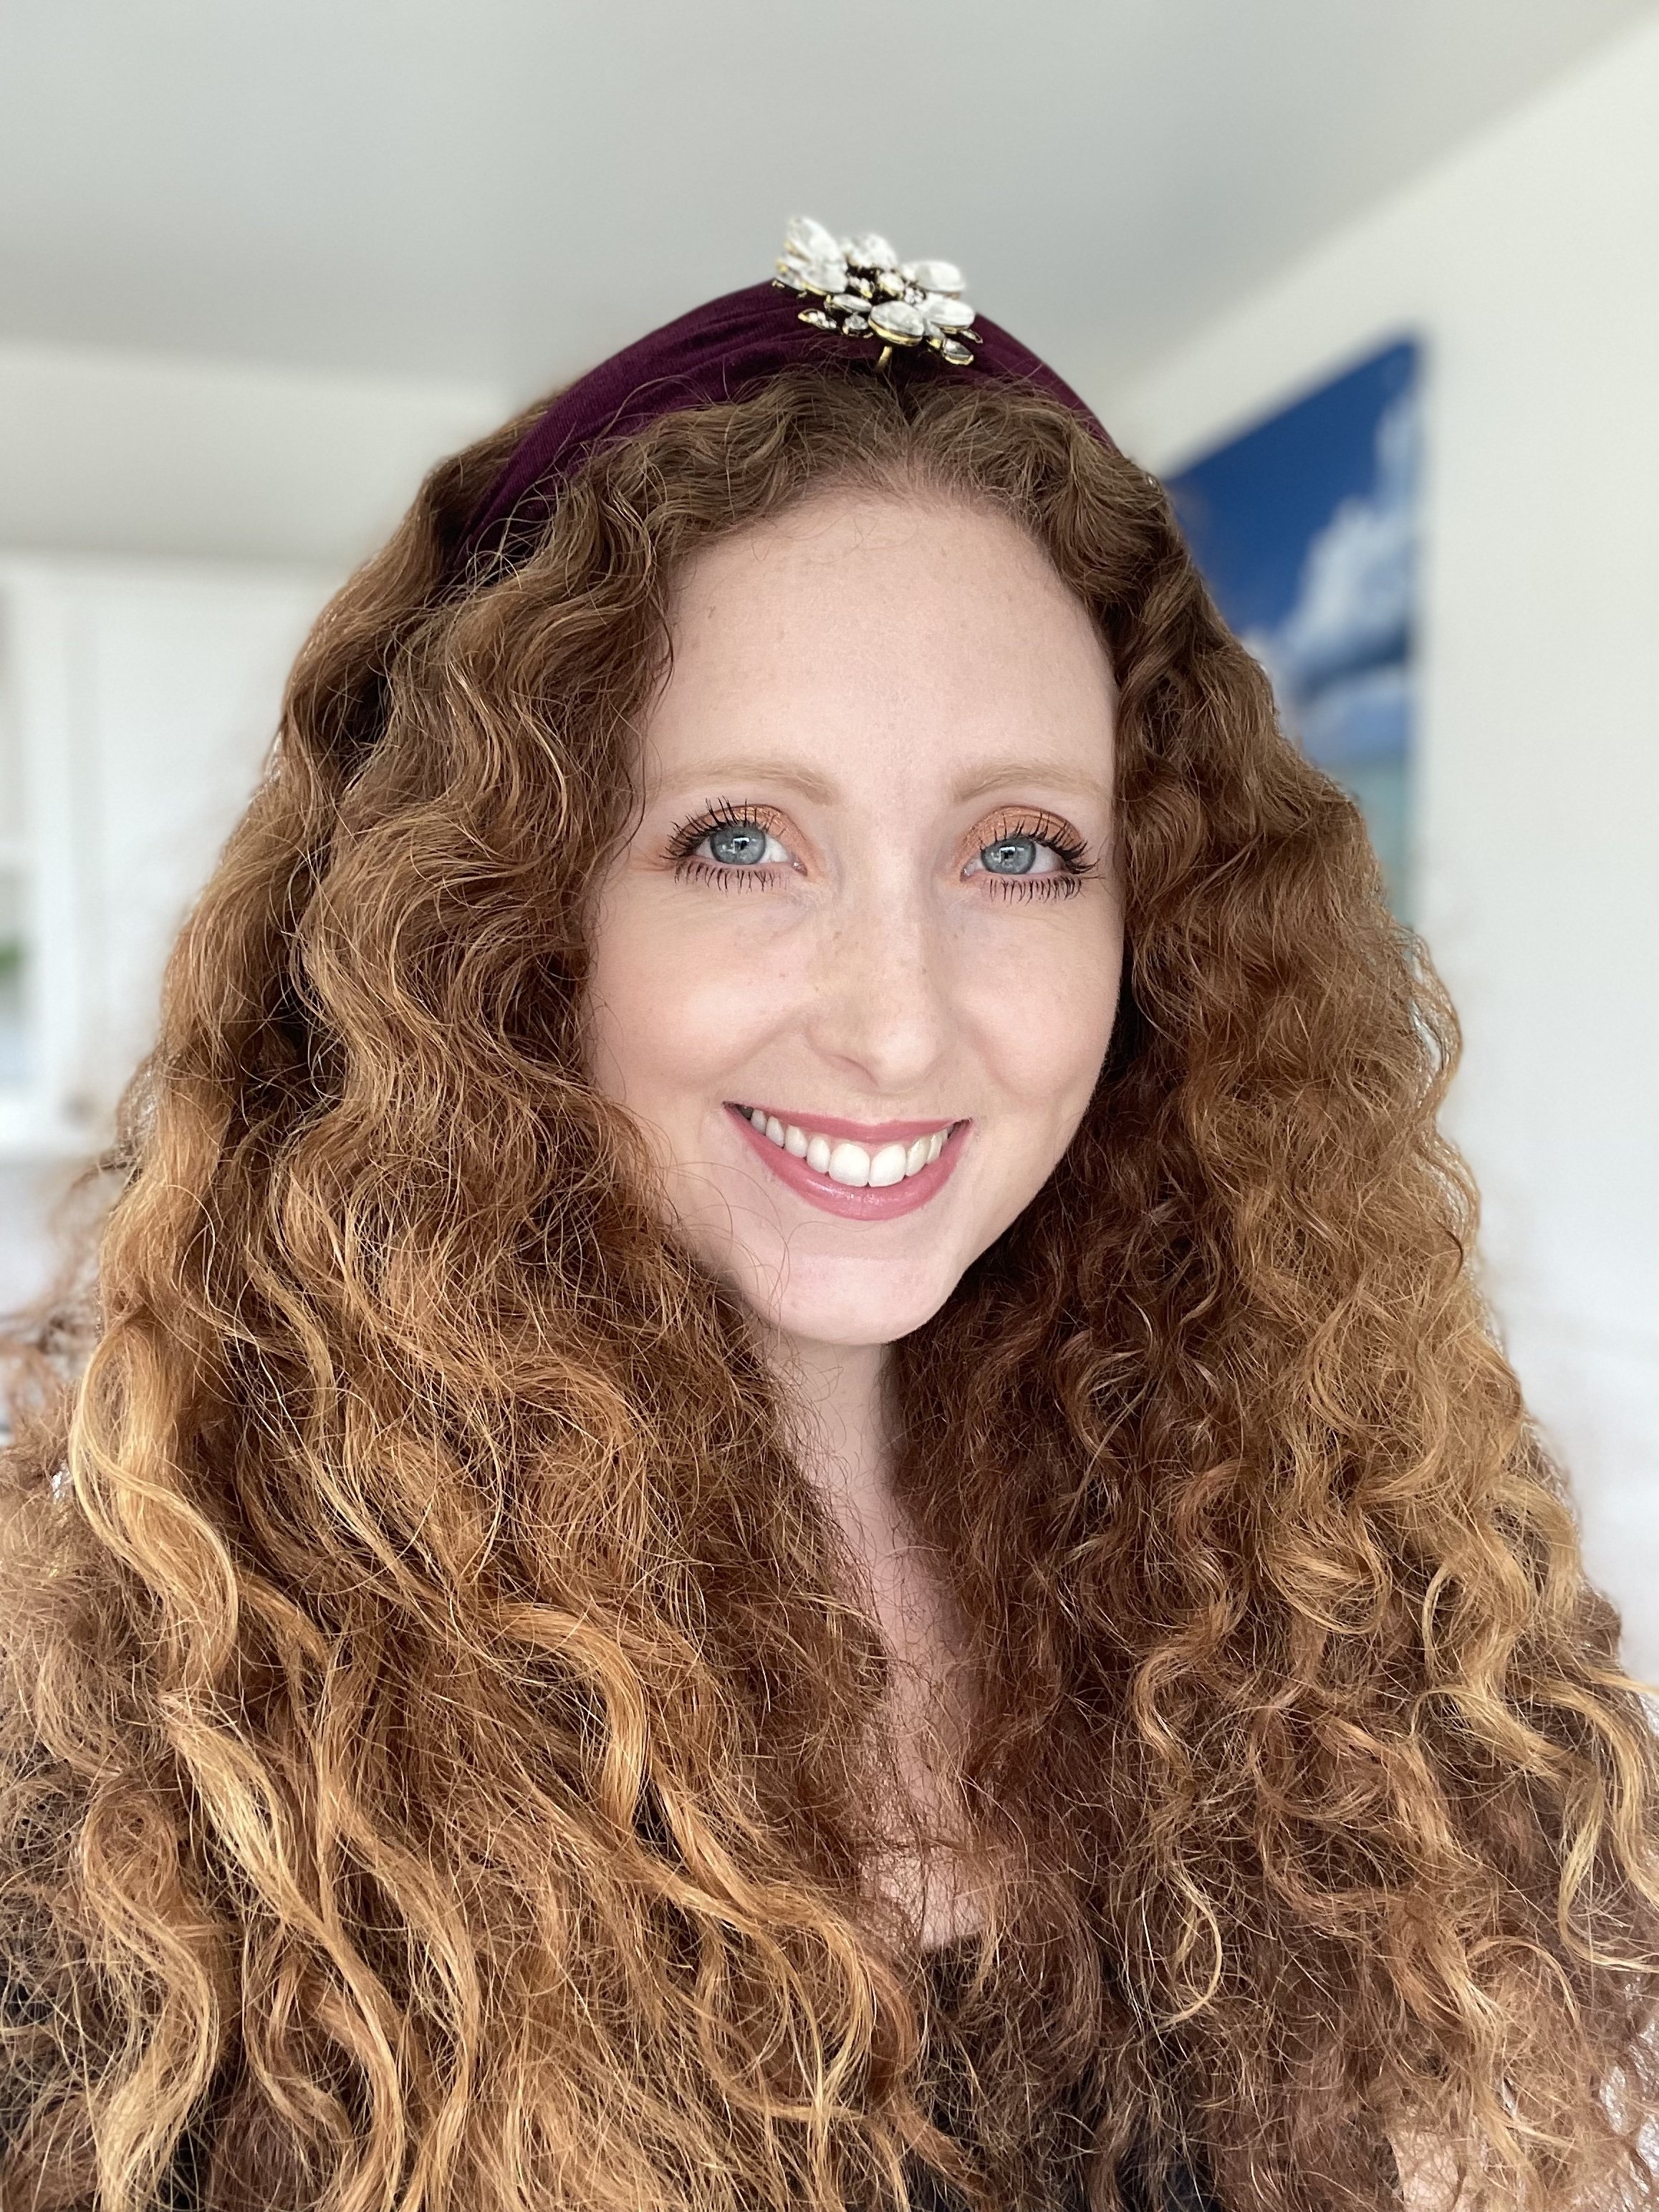 In this blog post, I am going to show you how to maintain frizzy curly hair. These are easy tips to tame frizz and care for your hair. After going through these curly hair tips, you’ll know how to treat frizzy curly hair and how to get rid of frizzy,